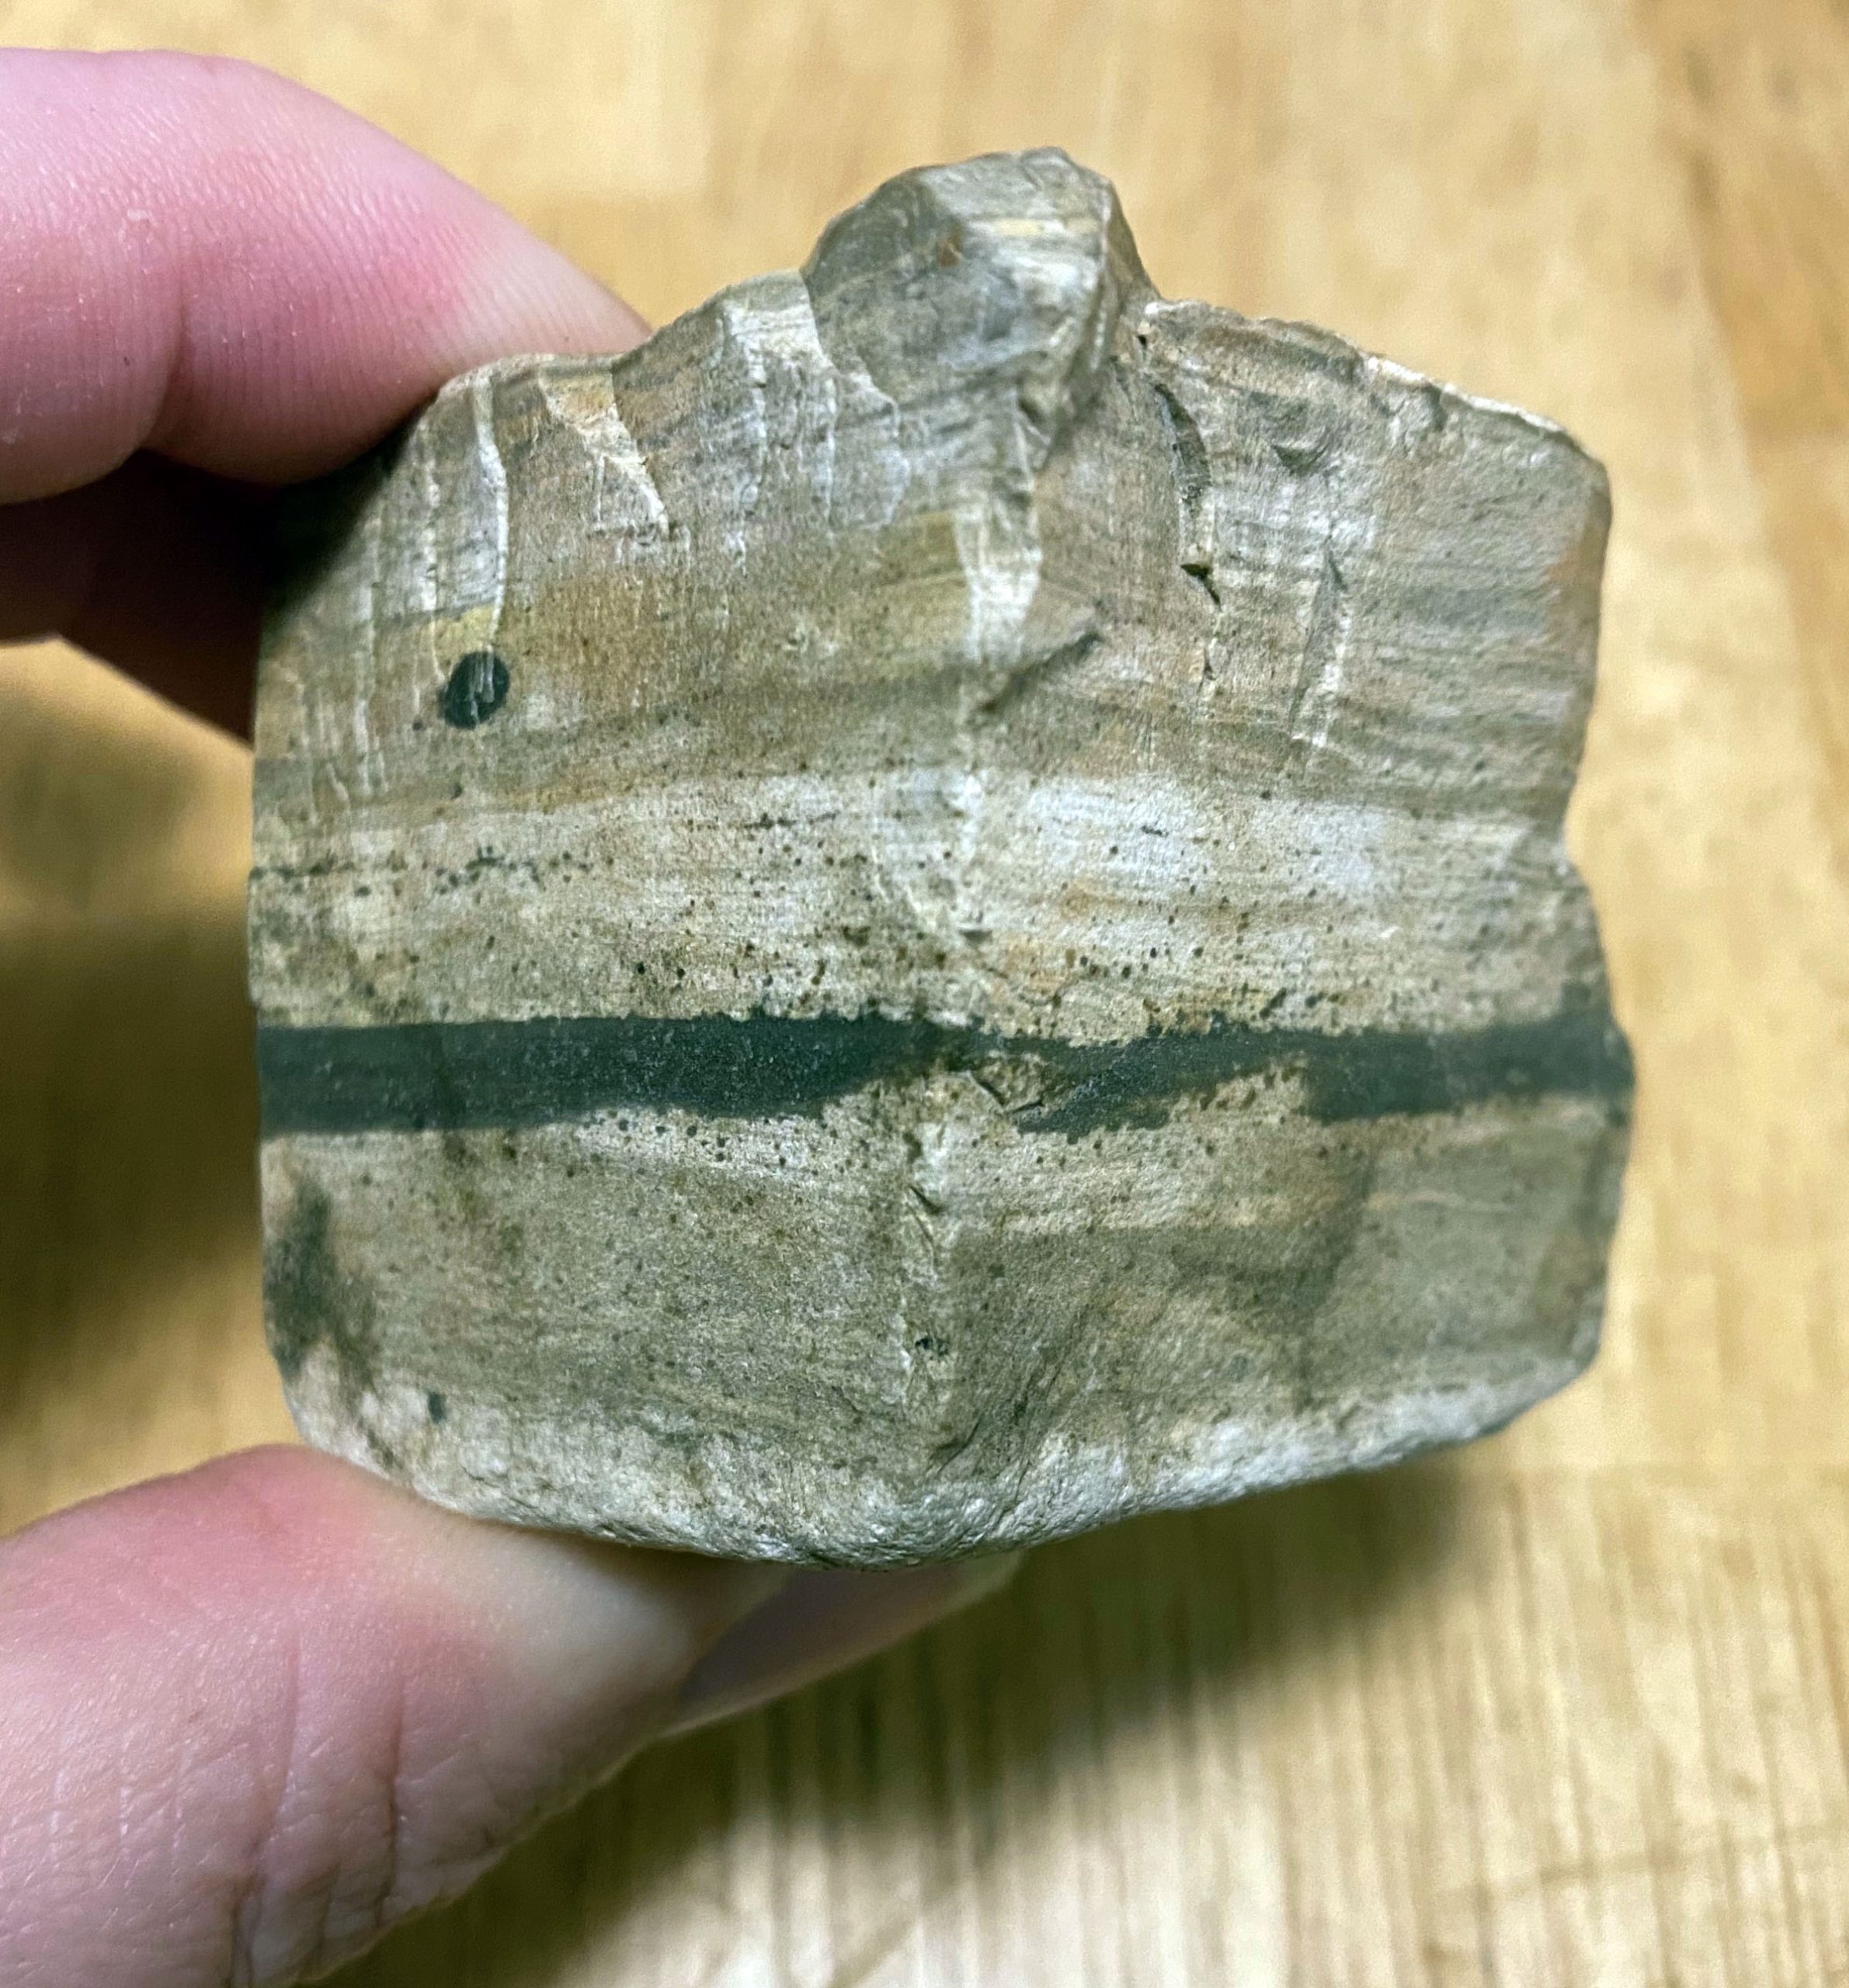 A rock irregularly cube-shaped, a couple inches on a side. White top and bottom with banding in various shades of gray and black, with one prominent black band.